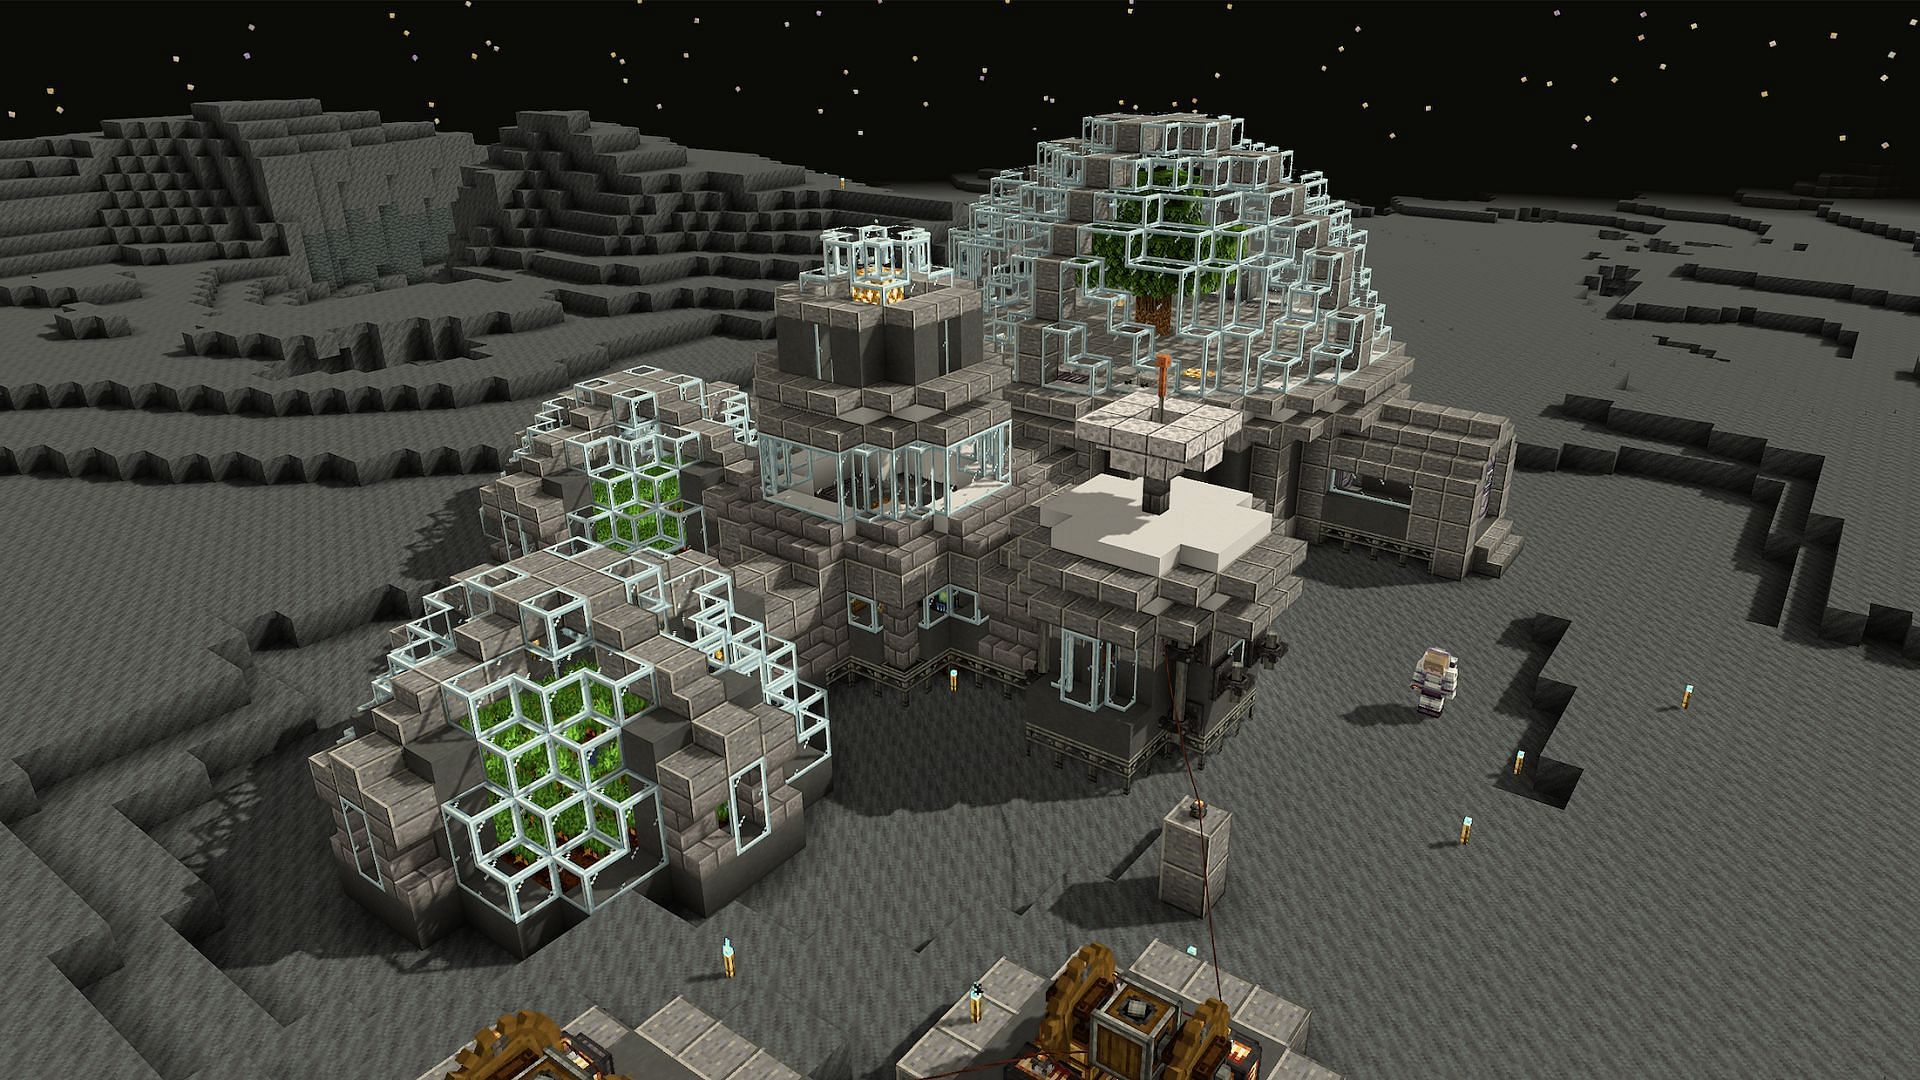 Ad Astra allows Minecraft players to travel to multiple new planets and planetoids like the moon (Image via AlexNijjar/Modrinth)